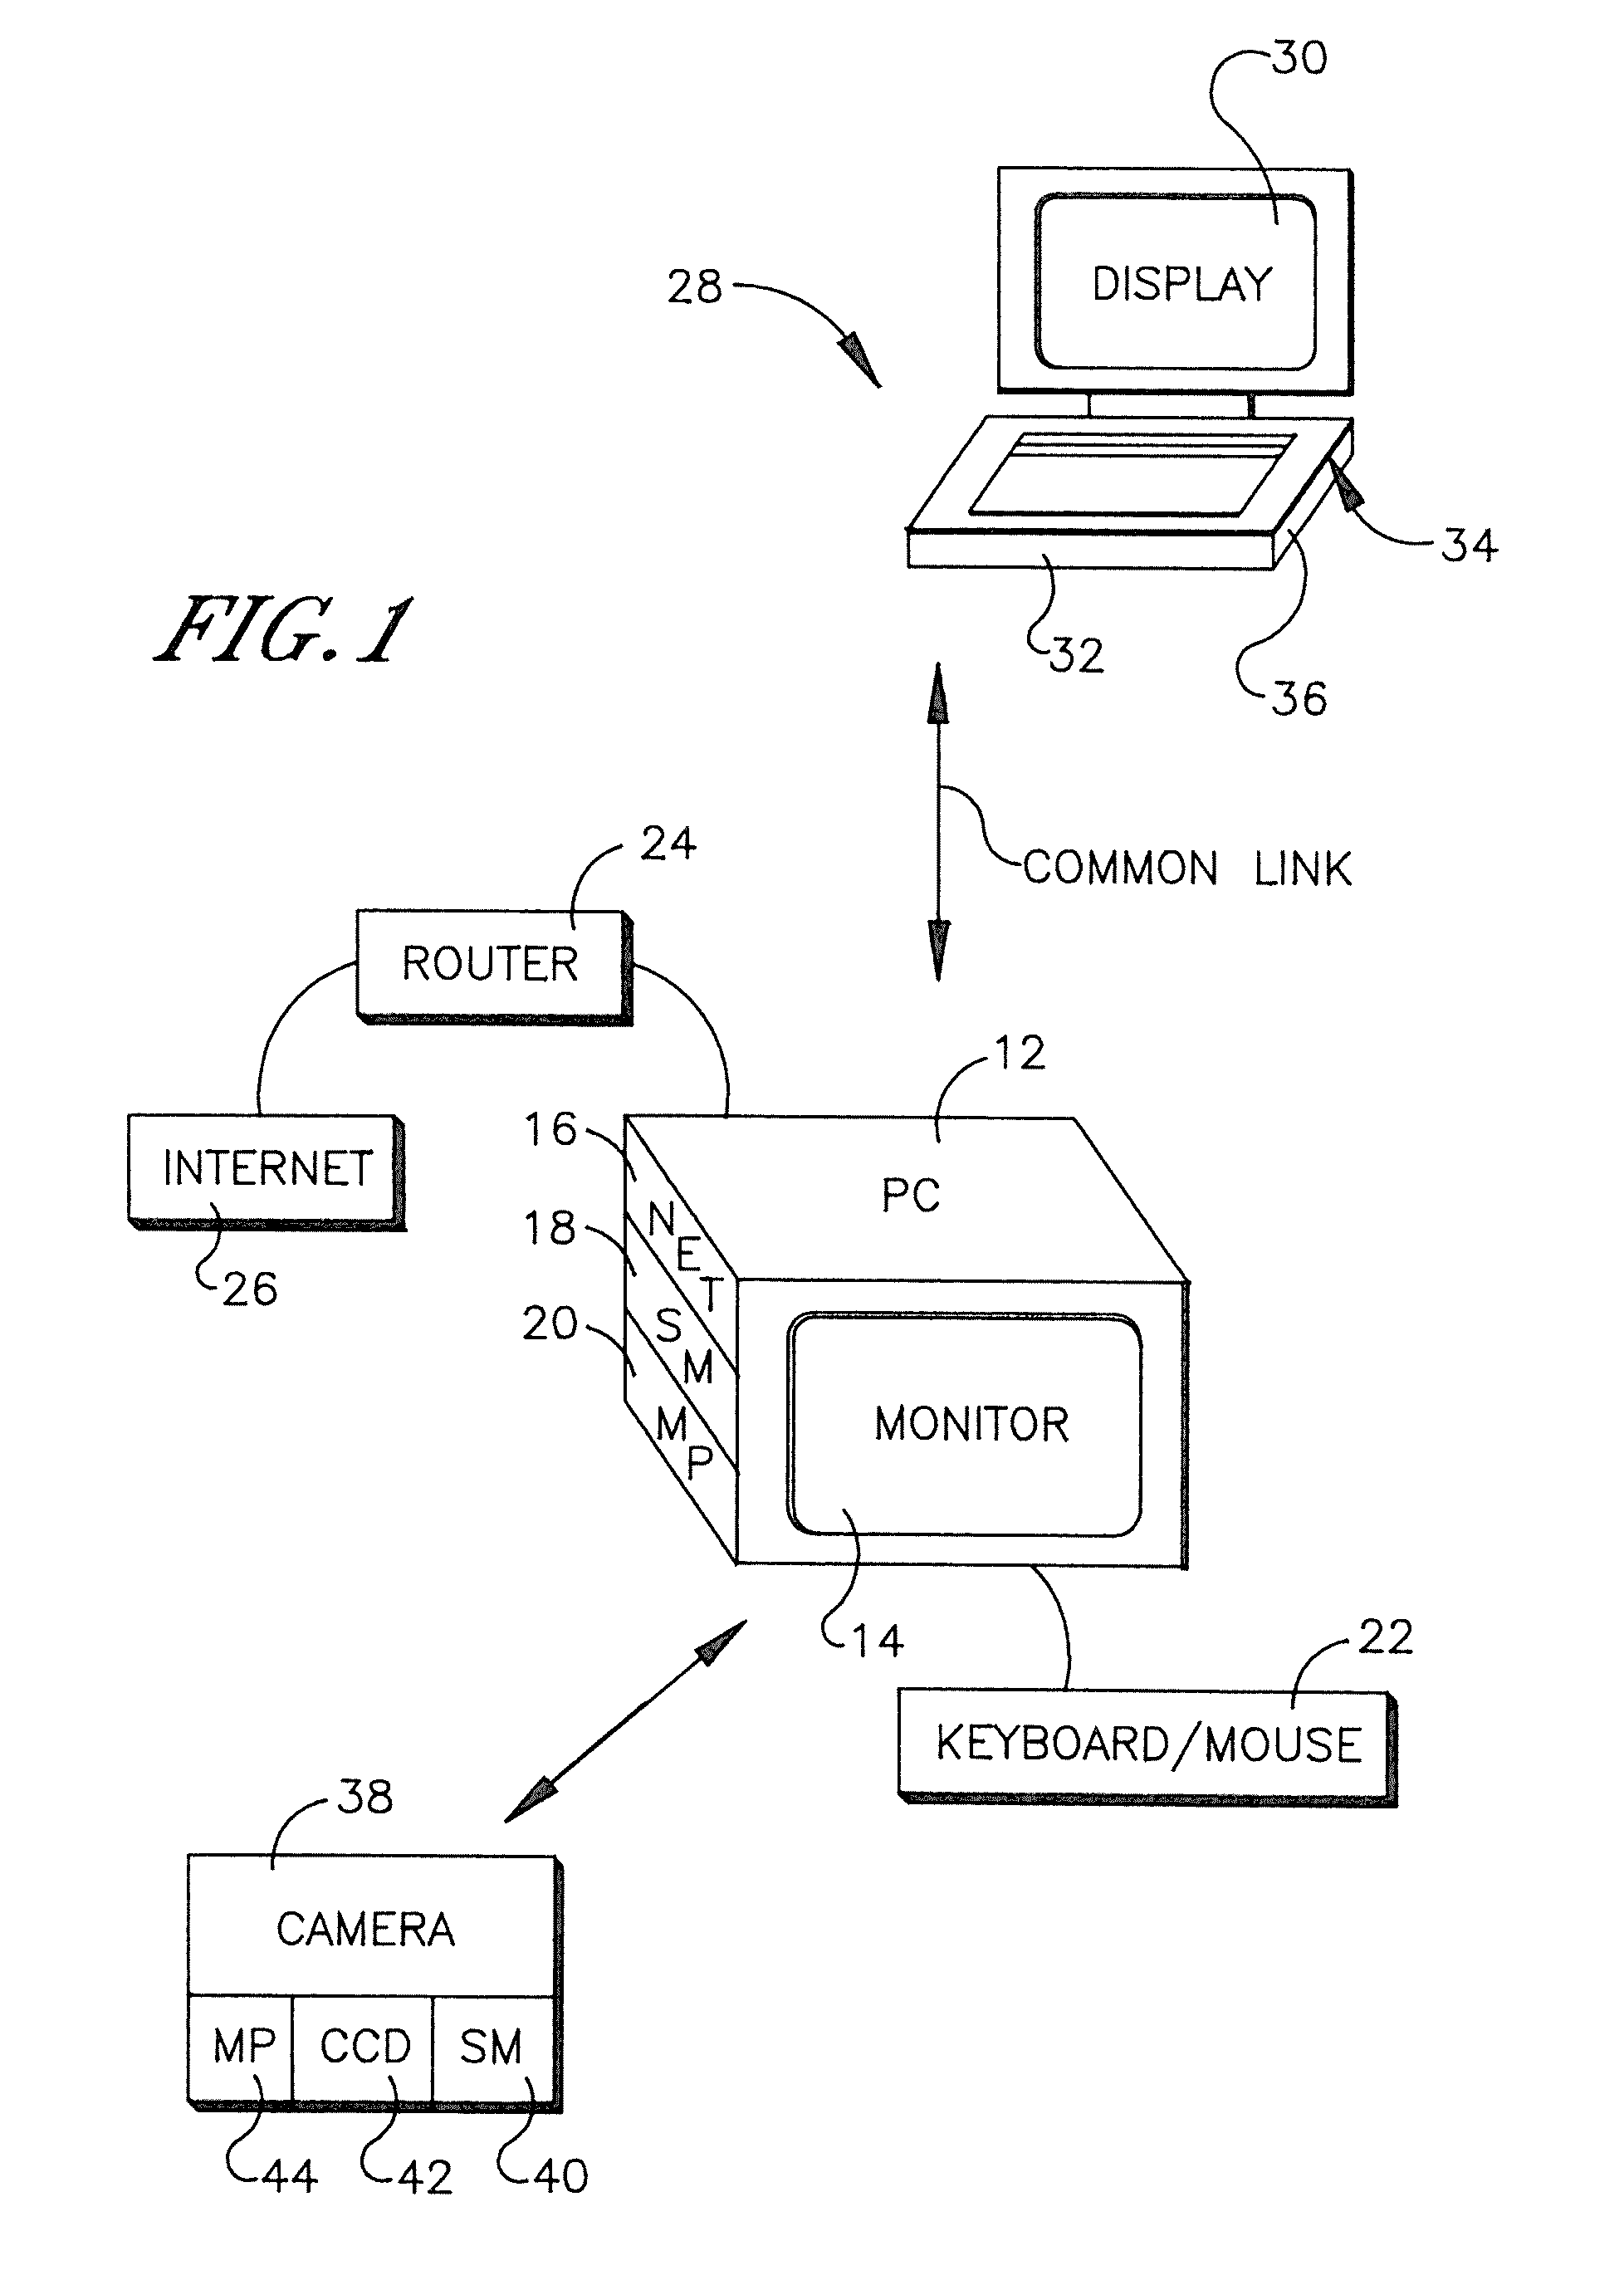 Automatic internet connection sharing among related devices